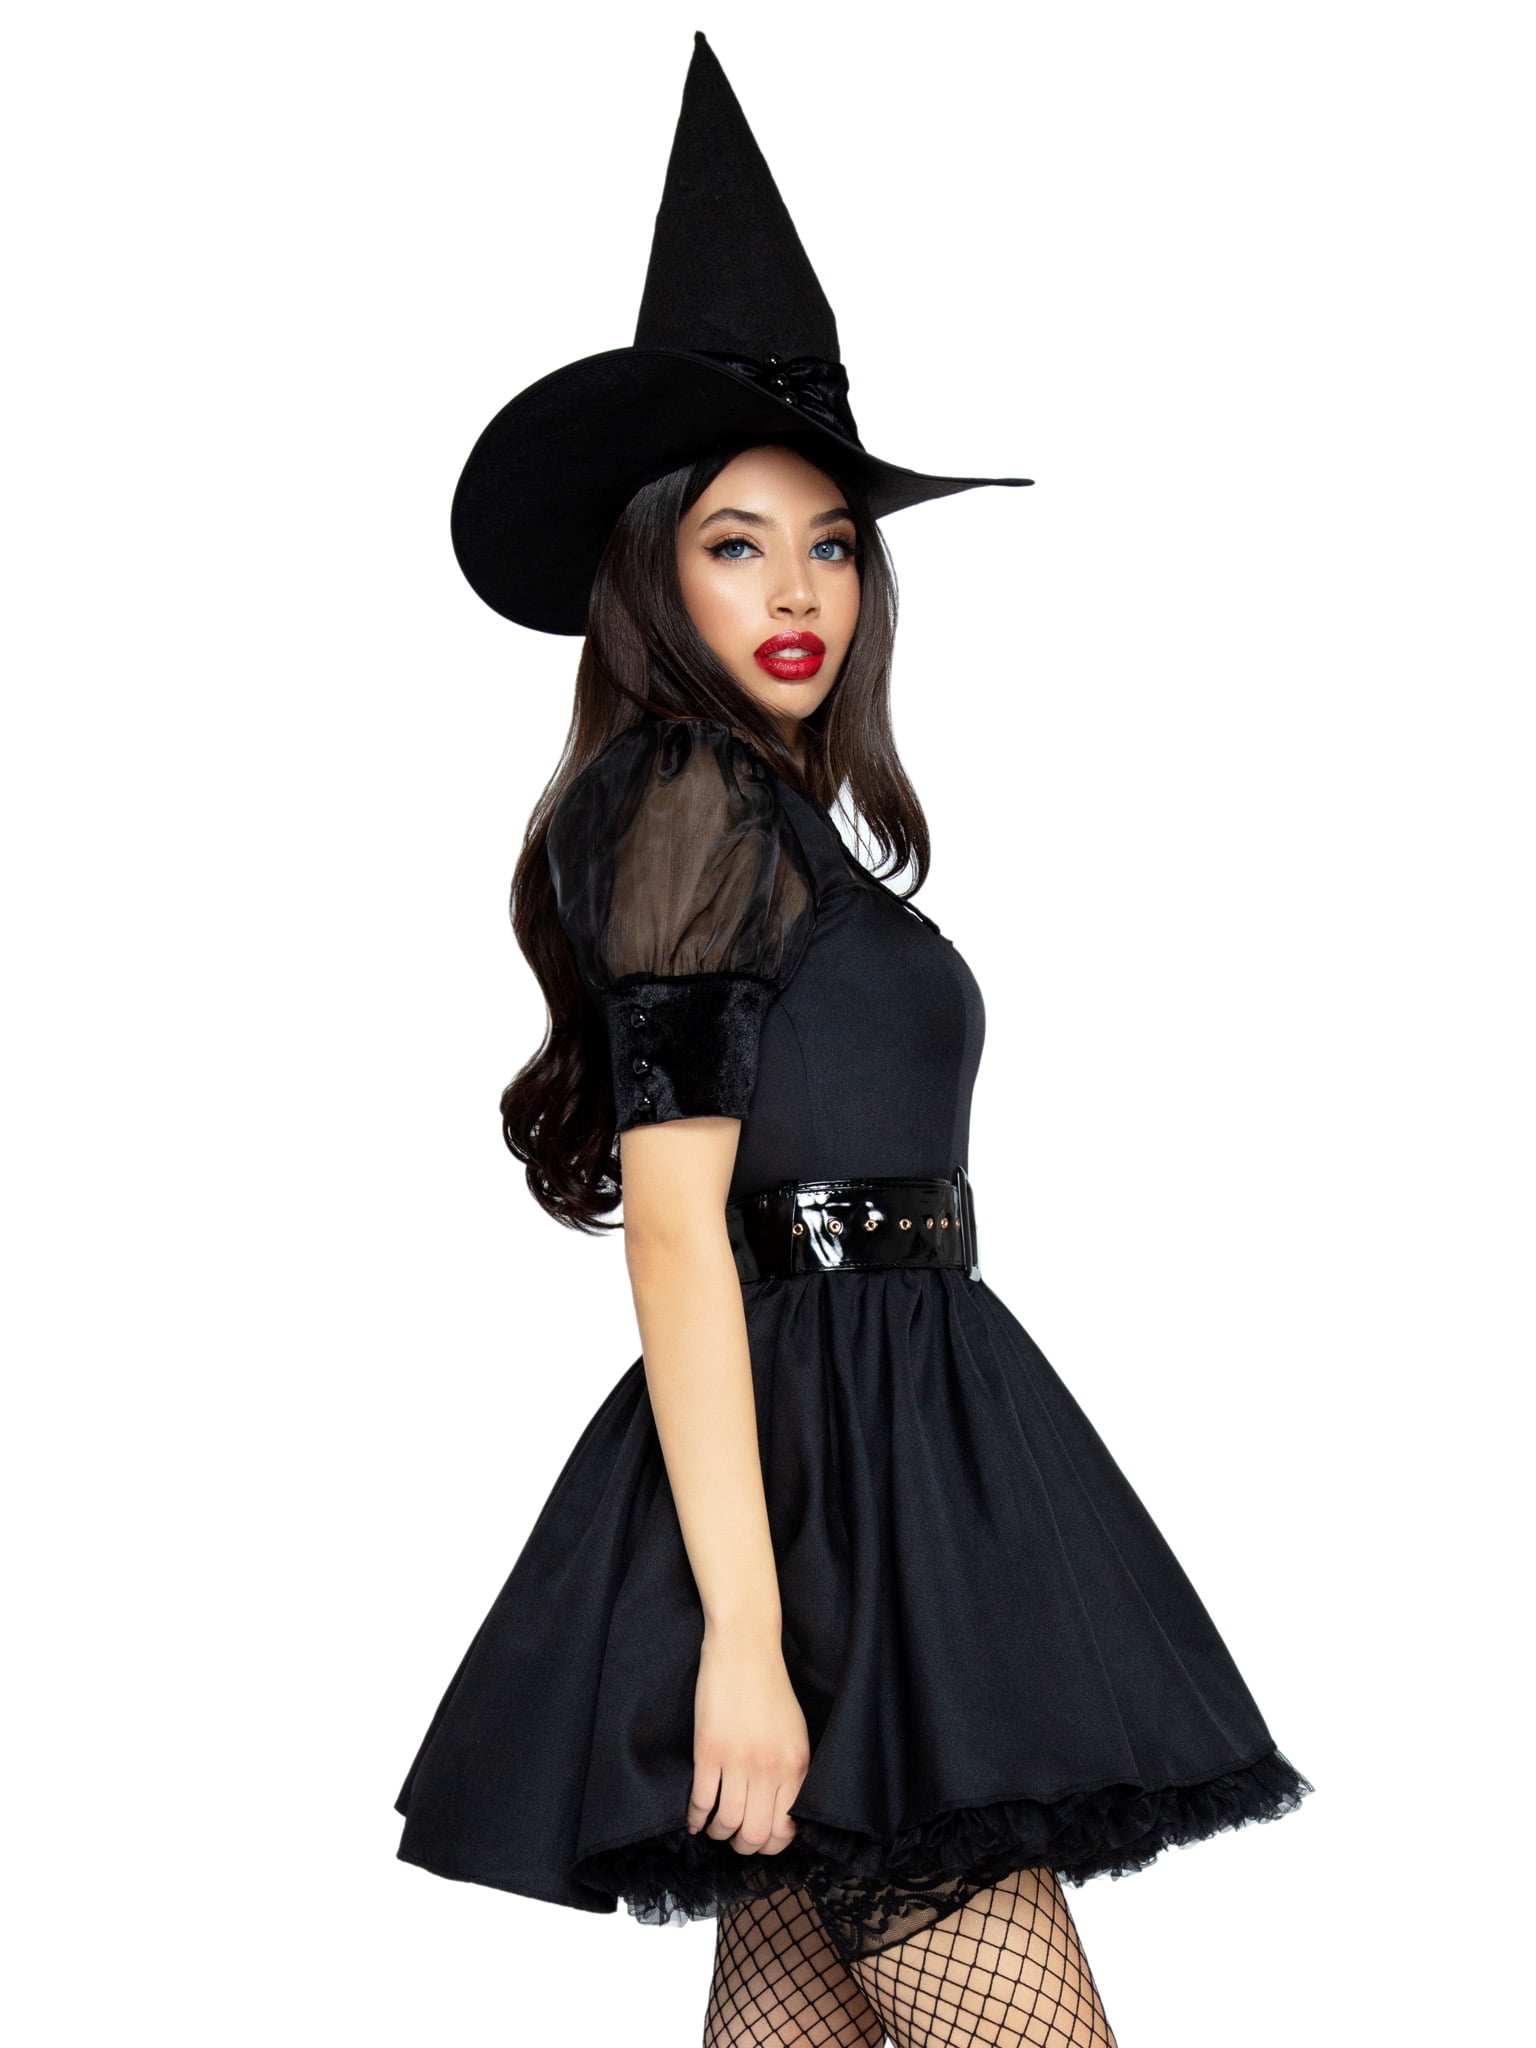 Leg Avenue Bewitching Witch Women's Halloween Fancy-Dress Costume for Adult, L -